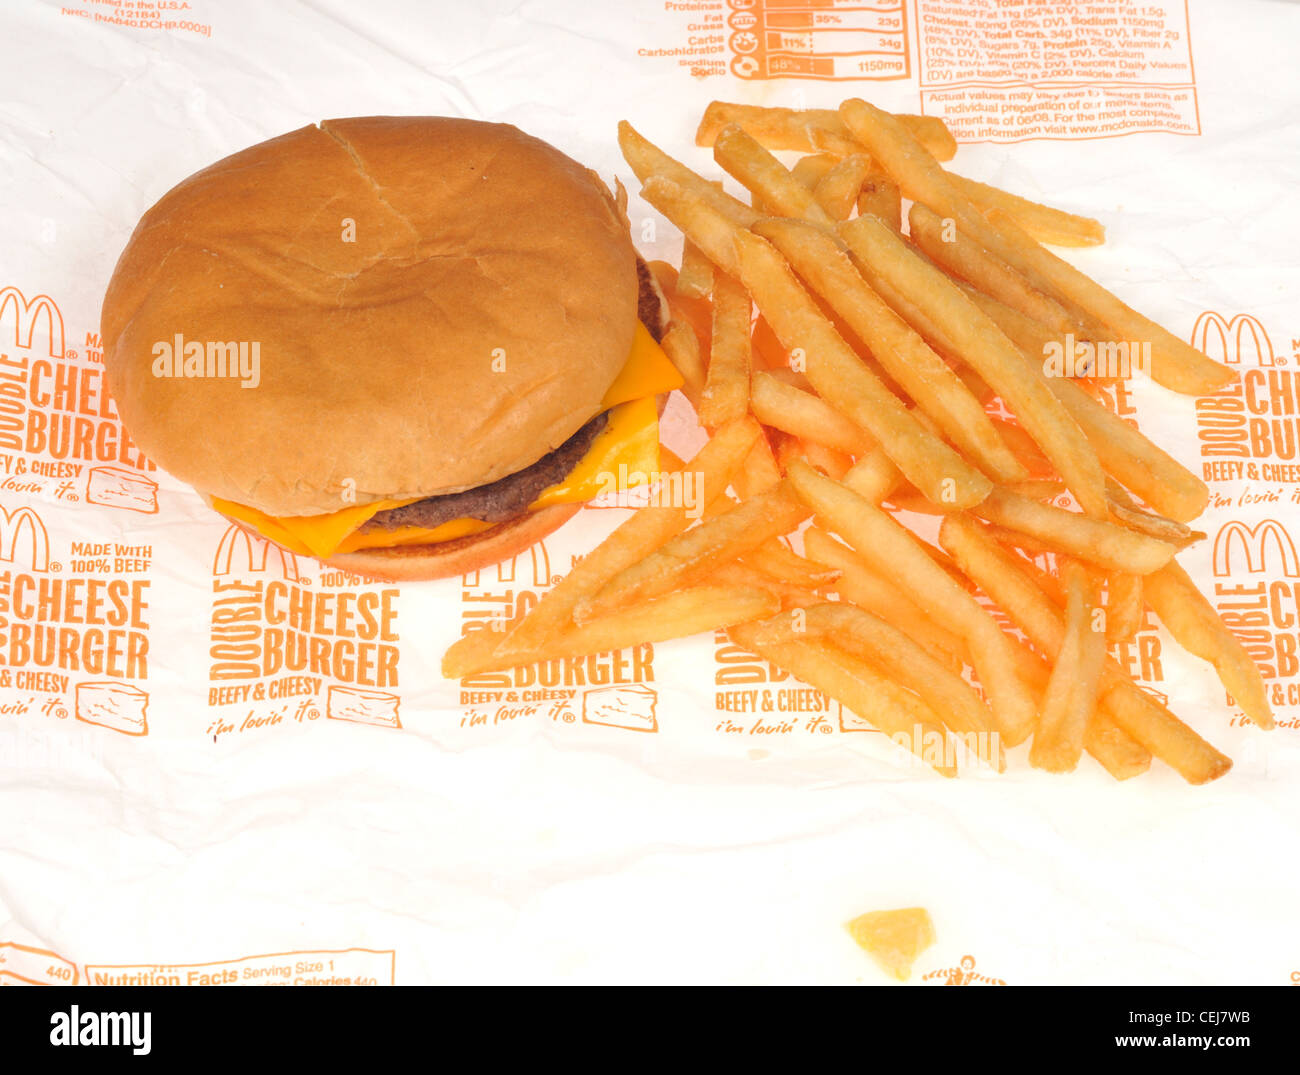 McDonalds double cheeseburger on paper wrapper with french fries or chips on white background USA Stock Photo